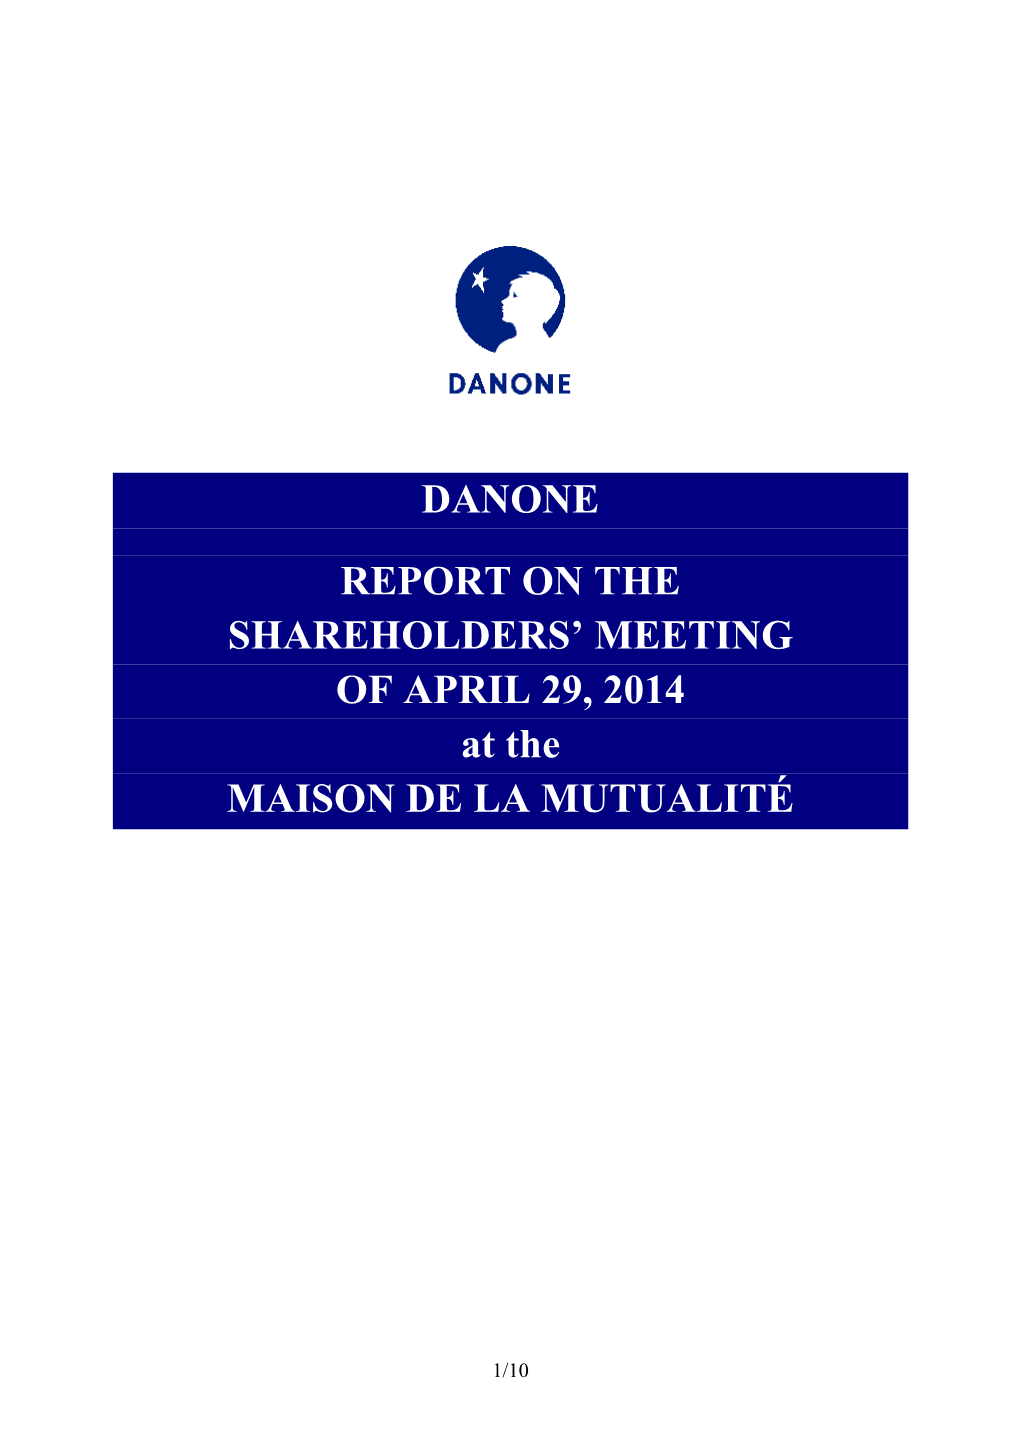 DANONE REPORT on the SHAREHOLDERS' MEETING of APRIL 29, 2014 at the MAISON DE LA MUTUALITÉ